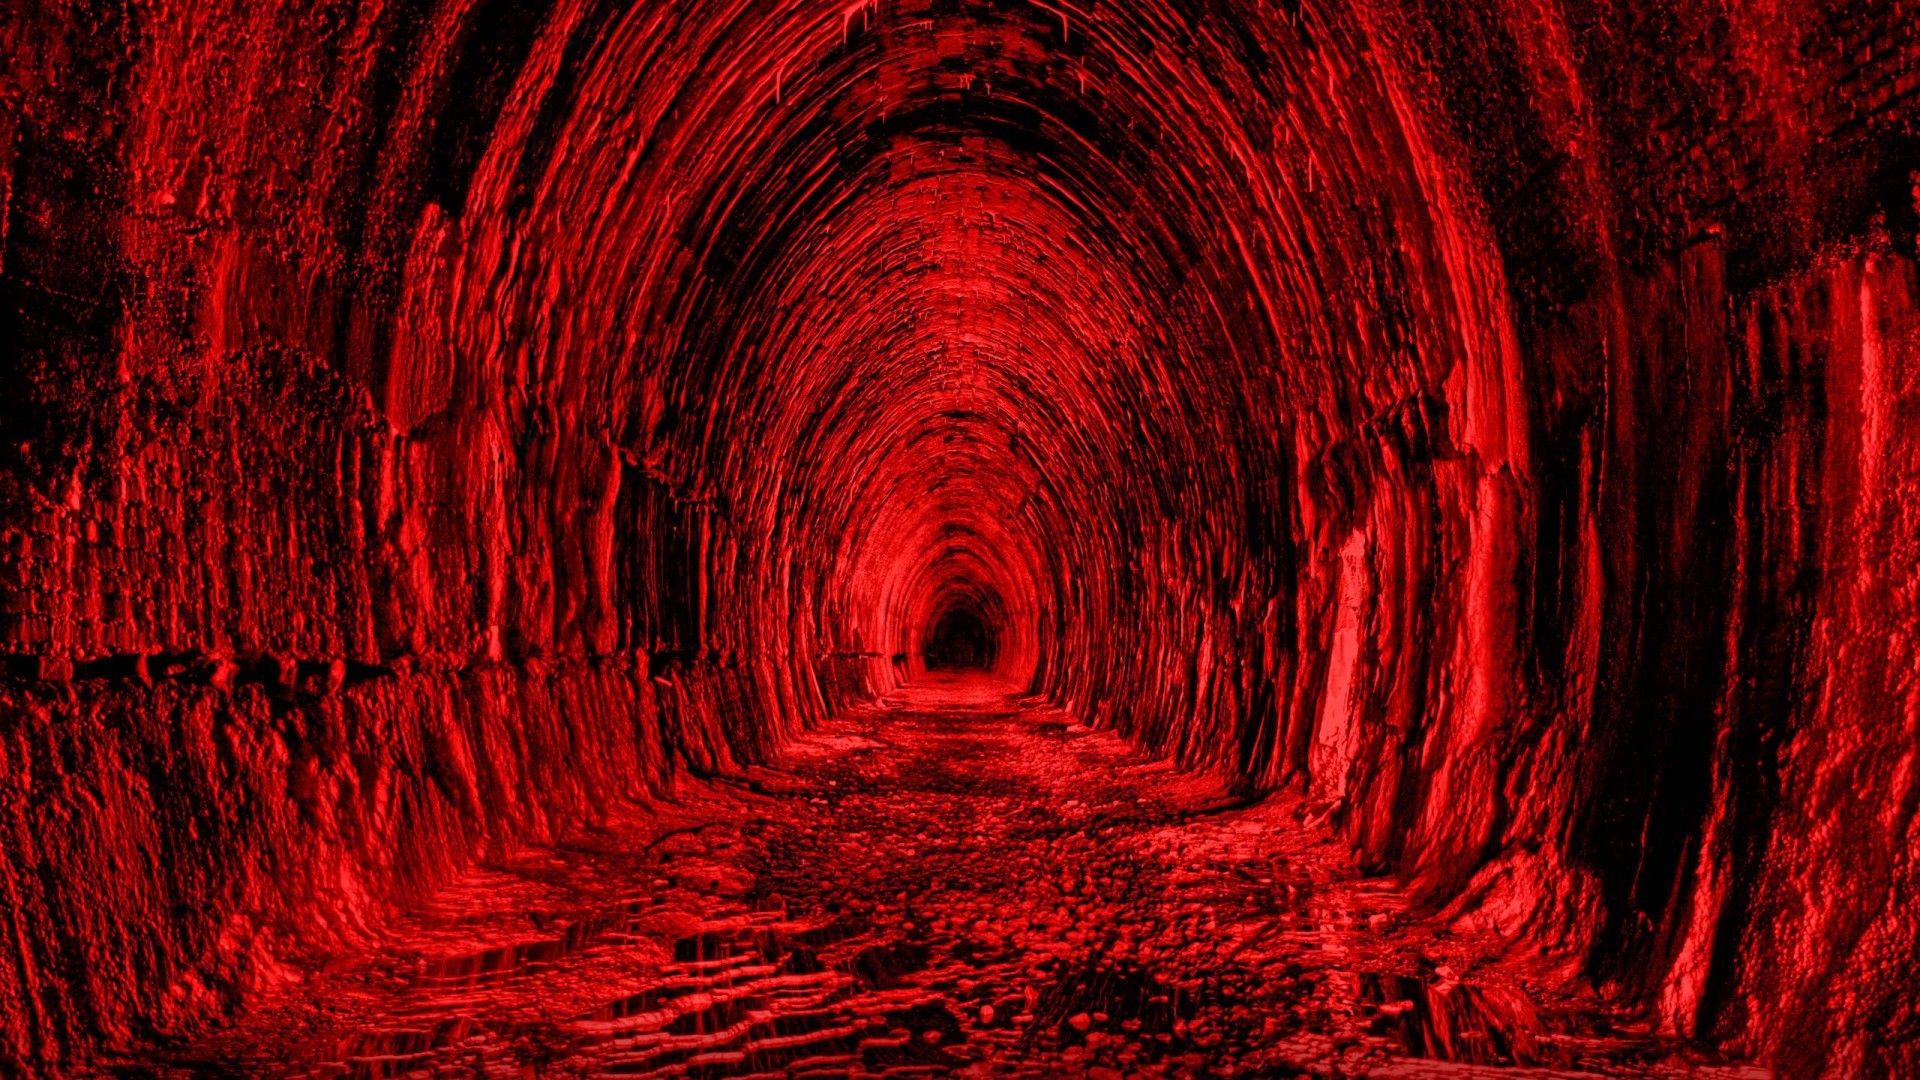  Blood Aesthetic  Wallpapers Wallpaper Cave